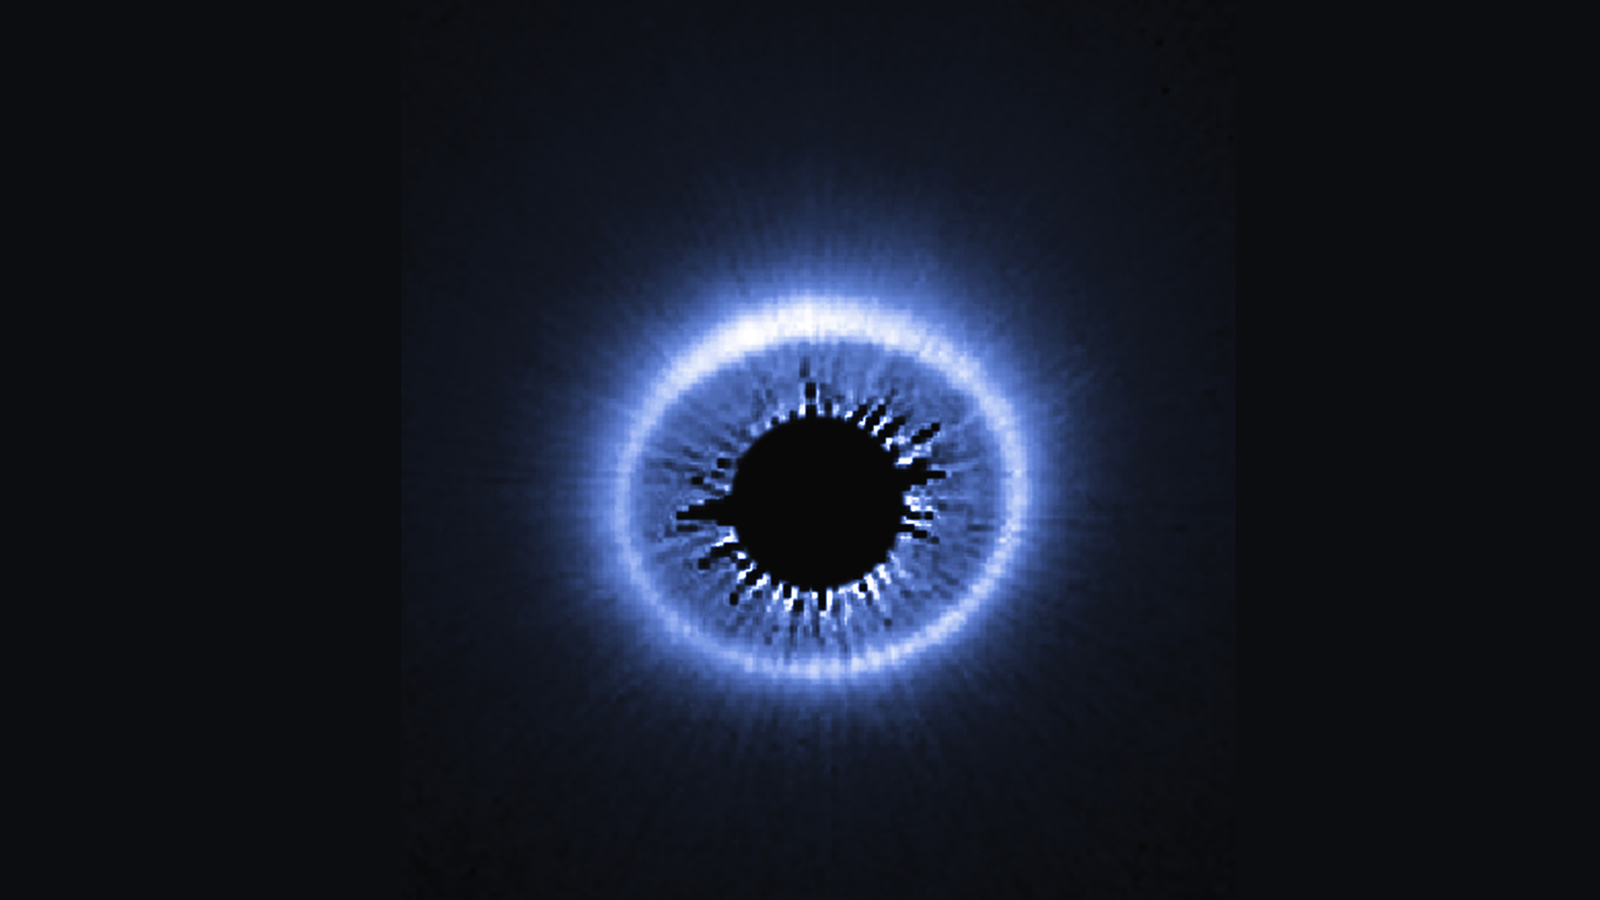 The marked asymmetry of the debris disk around the star HD 181327 suggests it may have formed as a result of the collision of two small bodies. The Disk Detective project aims to discover many other stellar disks using volunteer classifications of data from NASA's WISE mission. Image credit: NASA/ESA/Univ. of Arizona/HST/GO 12228 Team